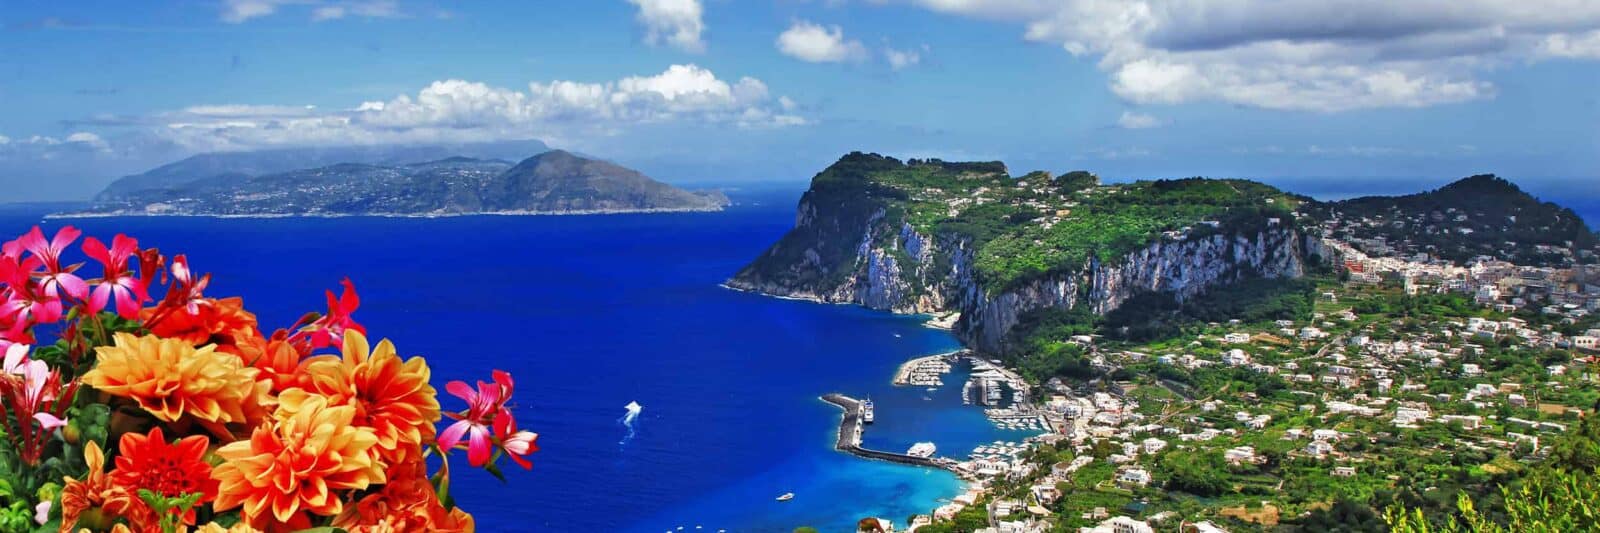 Capri is one of the most beautiful and well known Islands of Italy